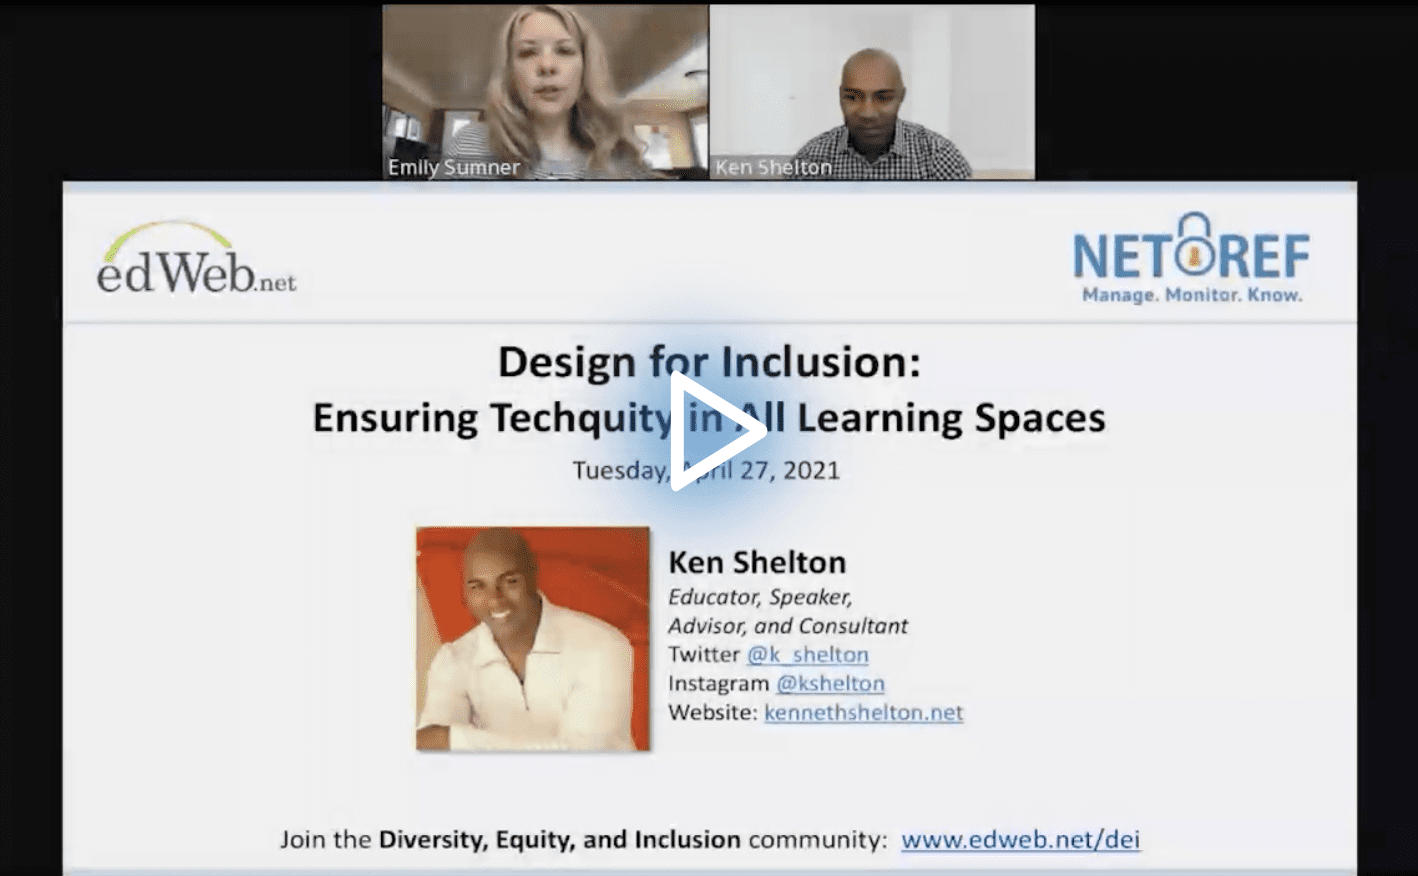 Design for Inclusion: Ensuring Techquity in All Learning Spaces edLeader Panel recording link